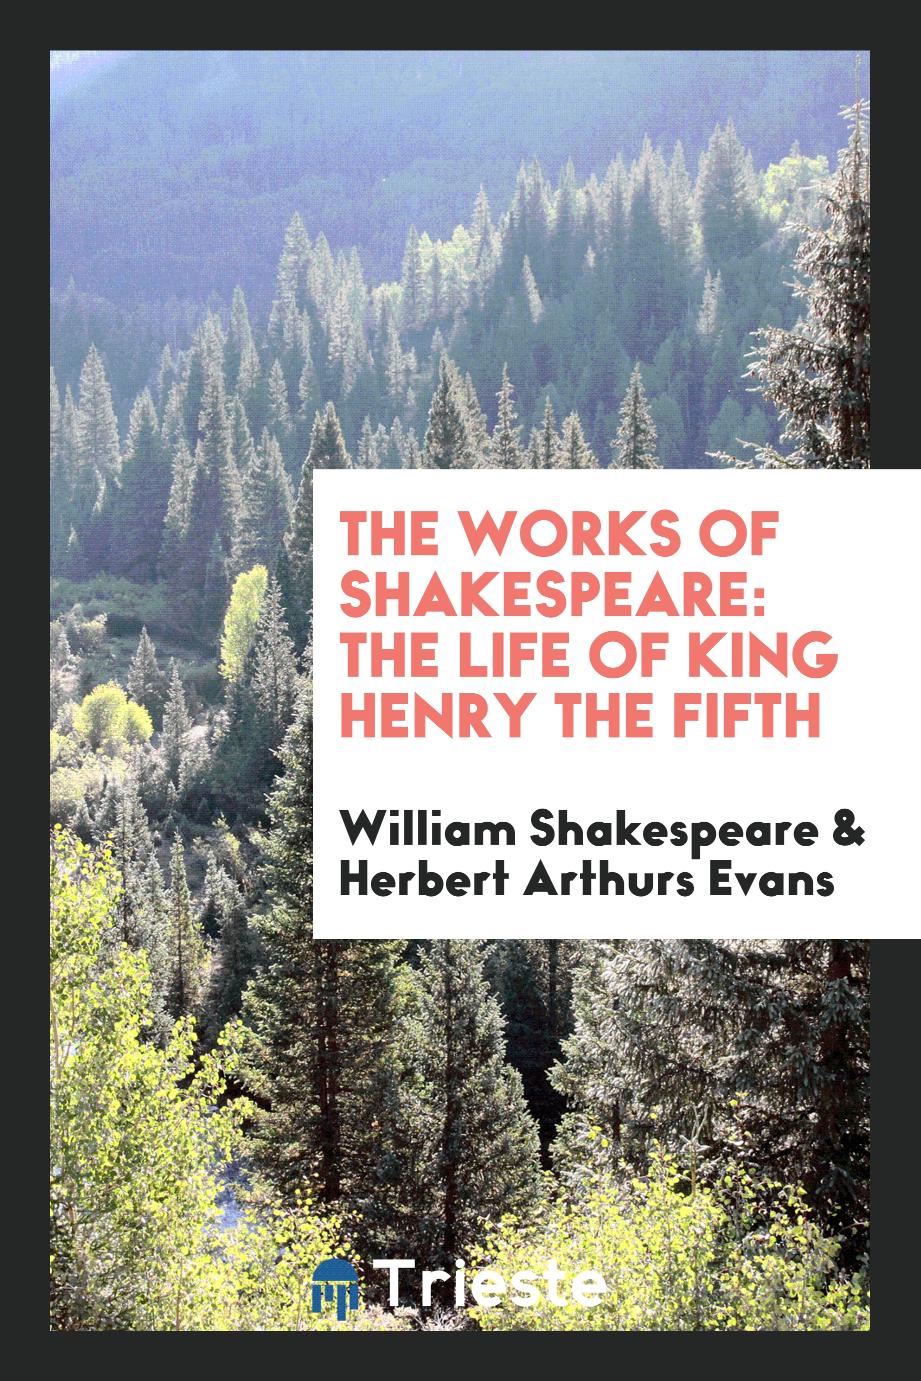 The Works of Shakespeare: The Life of King Henry the Fifth